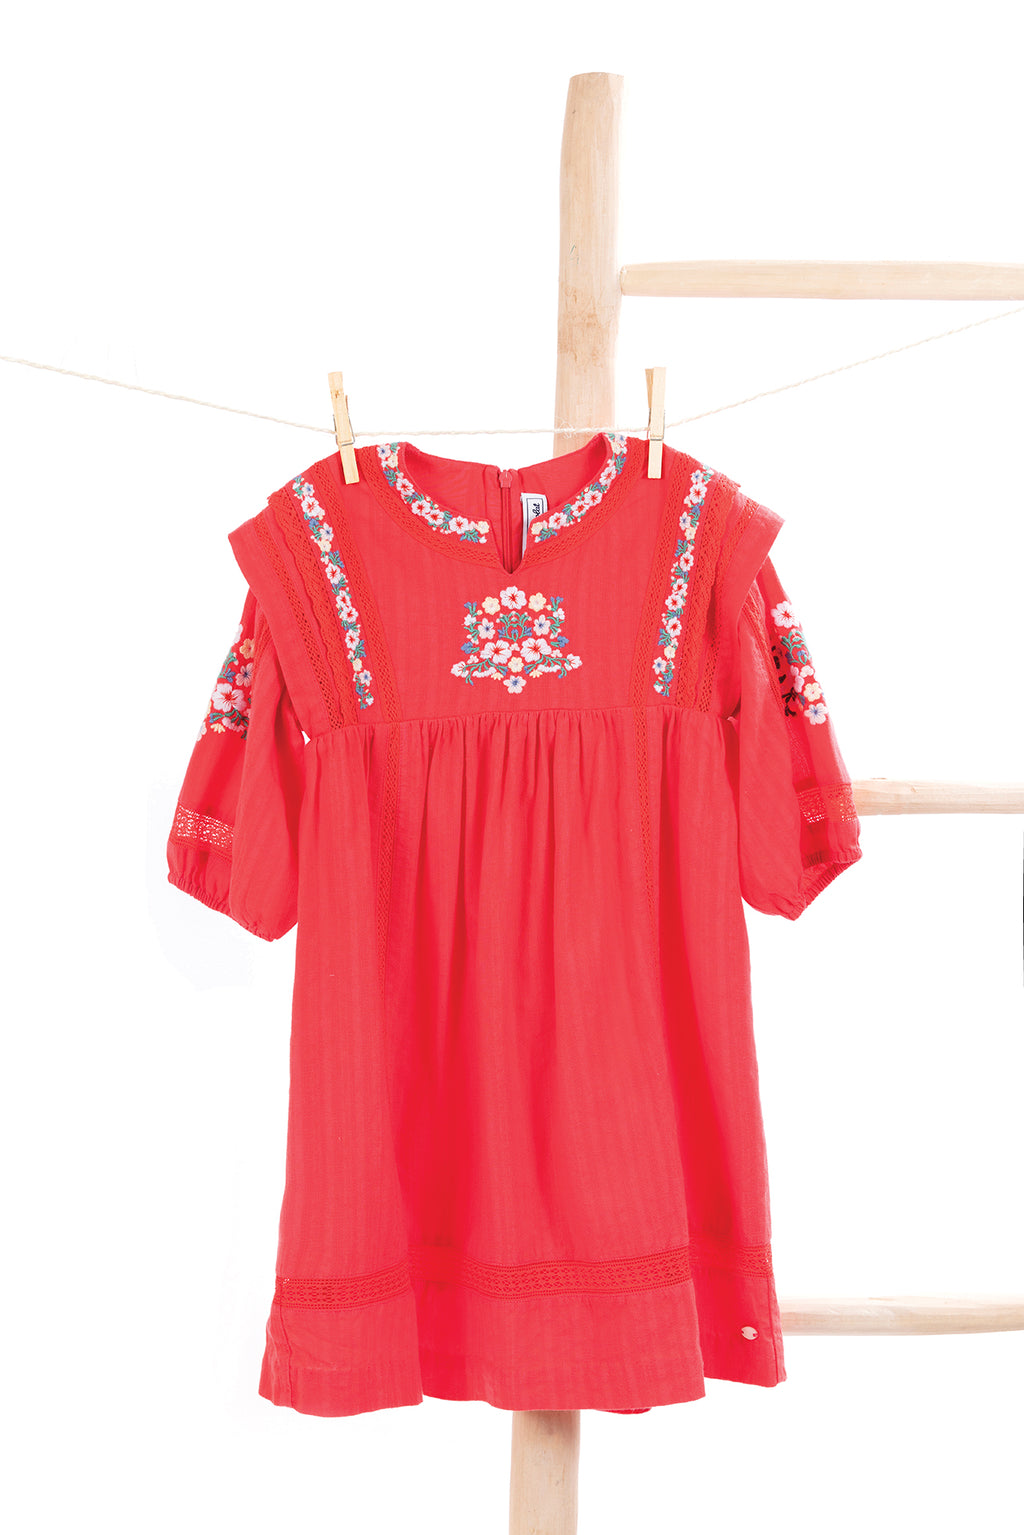 Dress - Red Floral embroidery